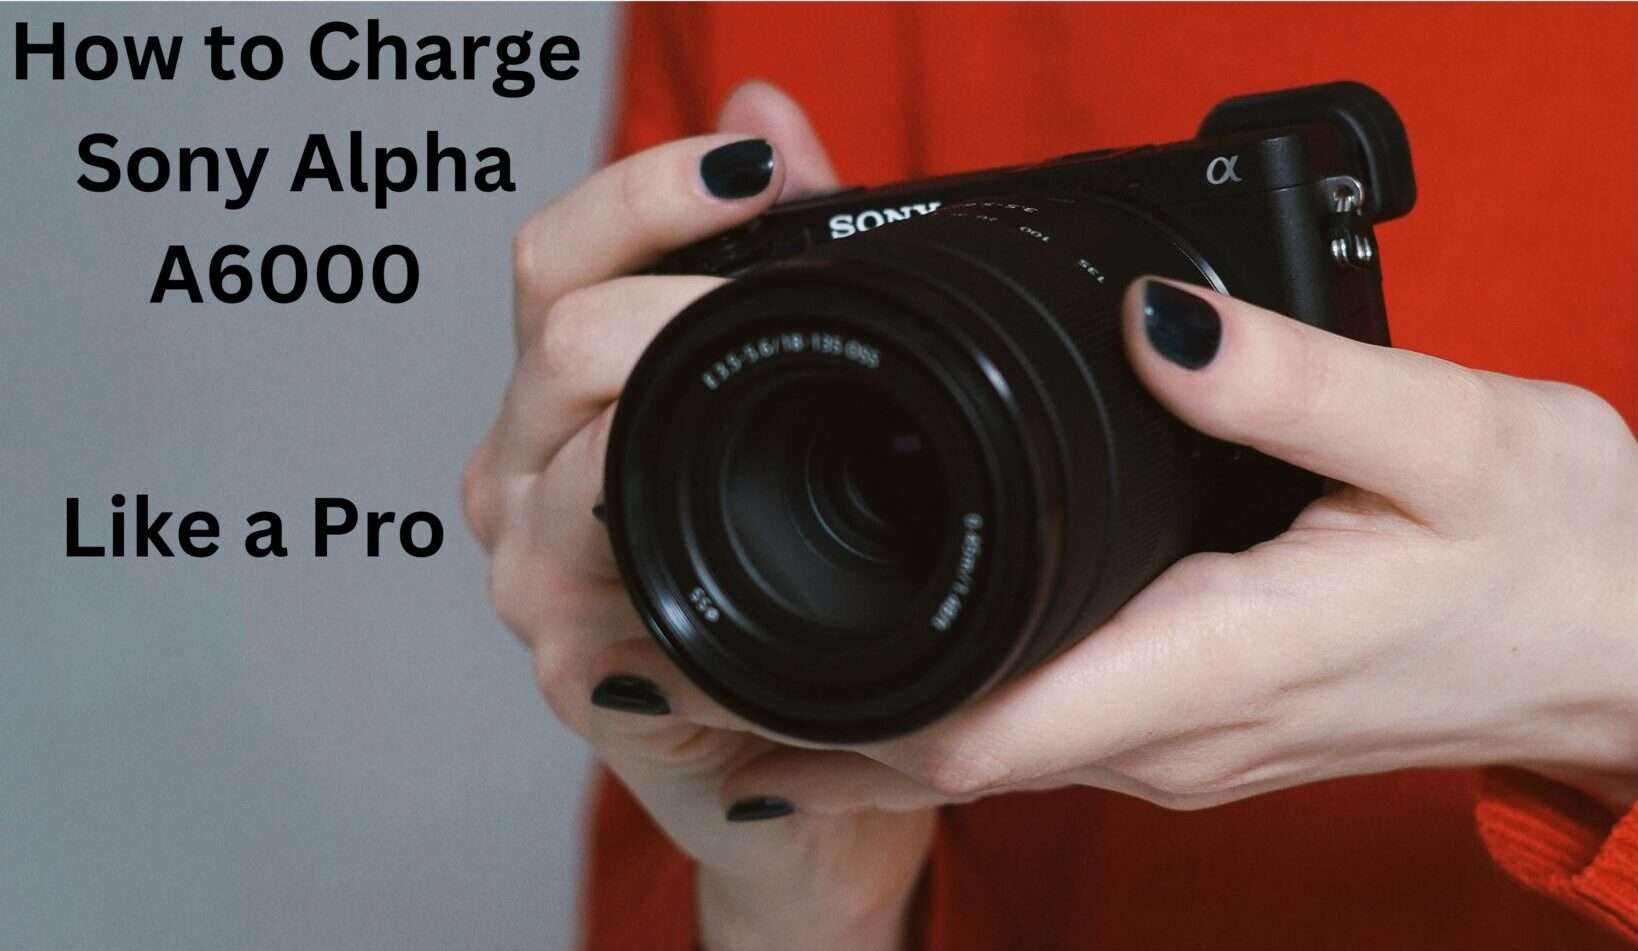 How to Charge Sony Alpha A6000